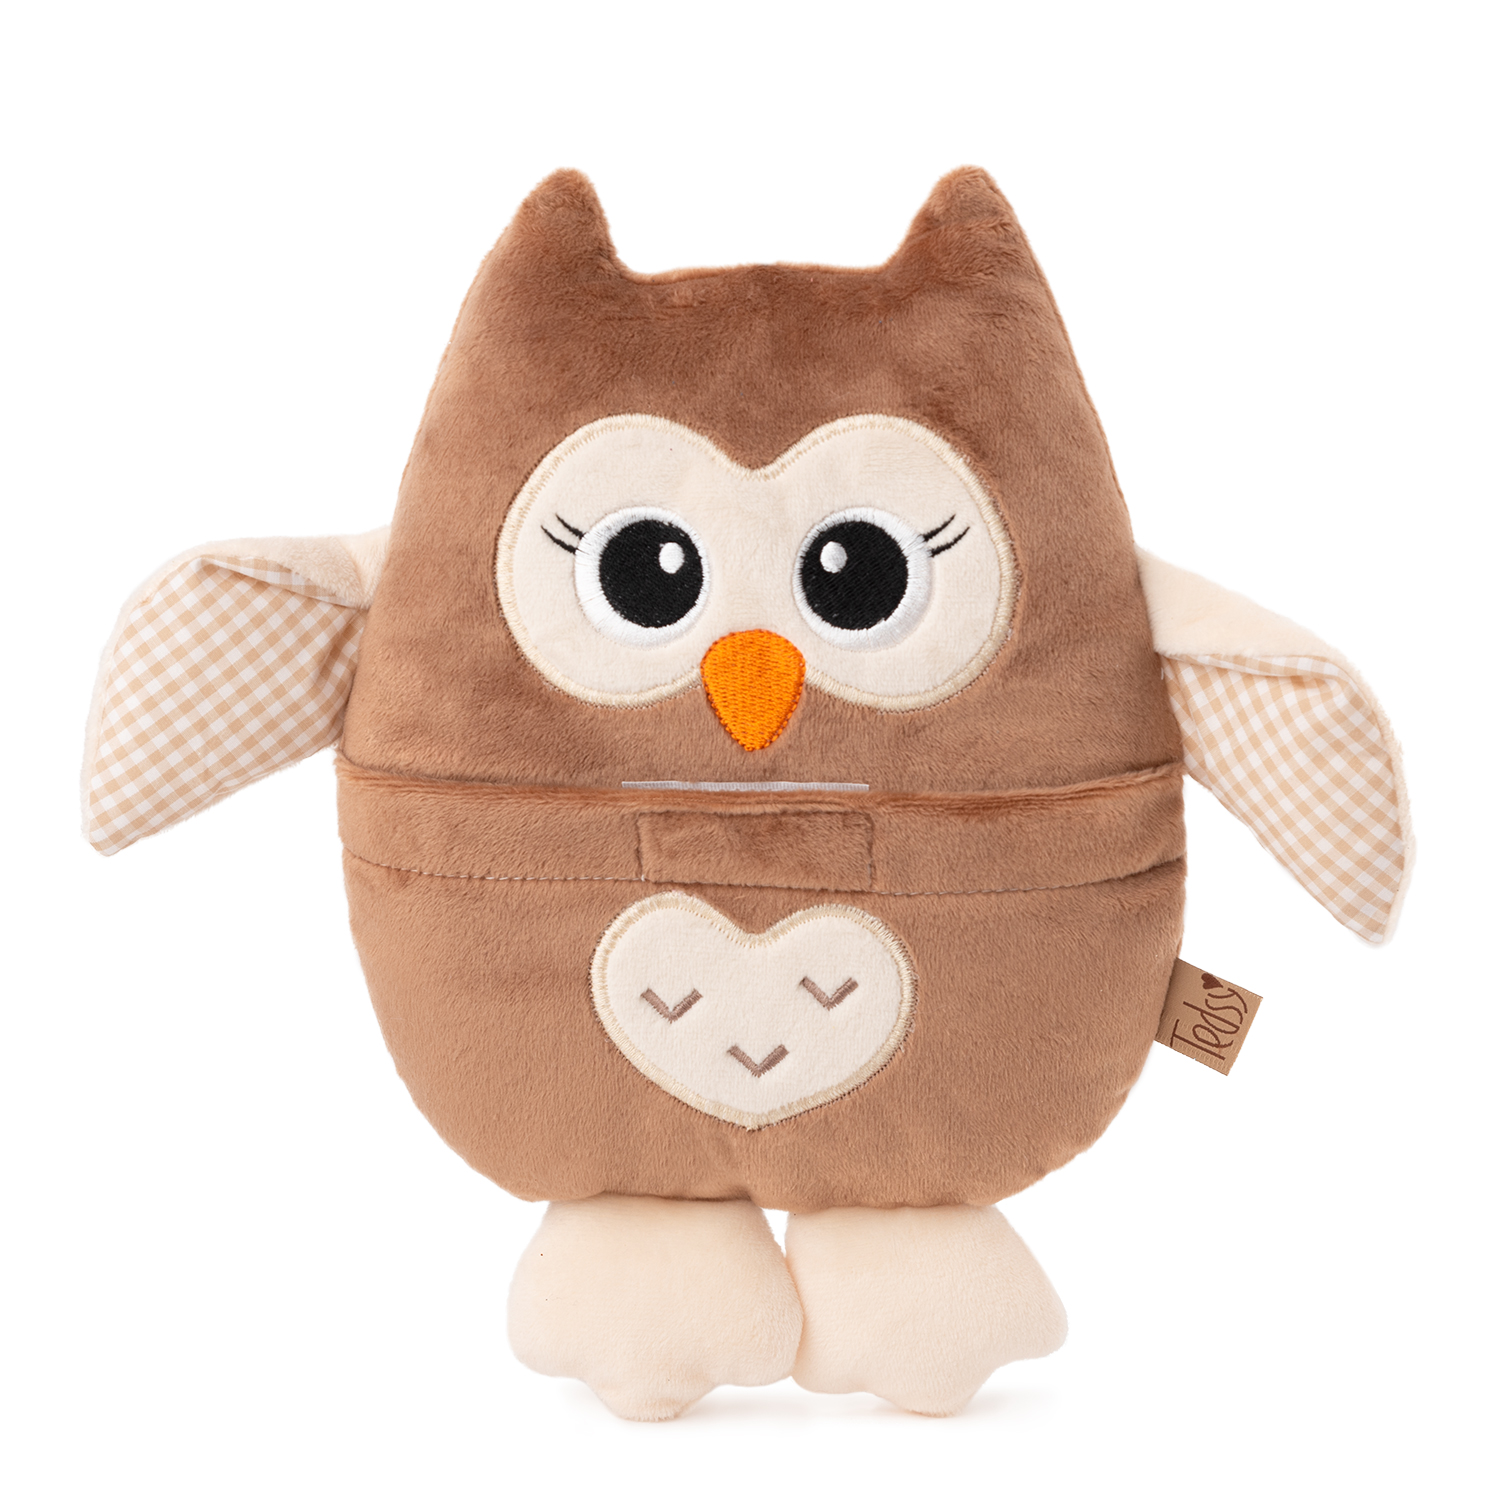 Toy Owl with Cherry Stones - Brown